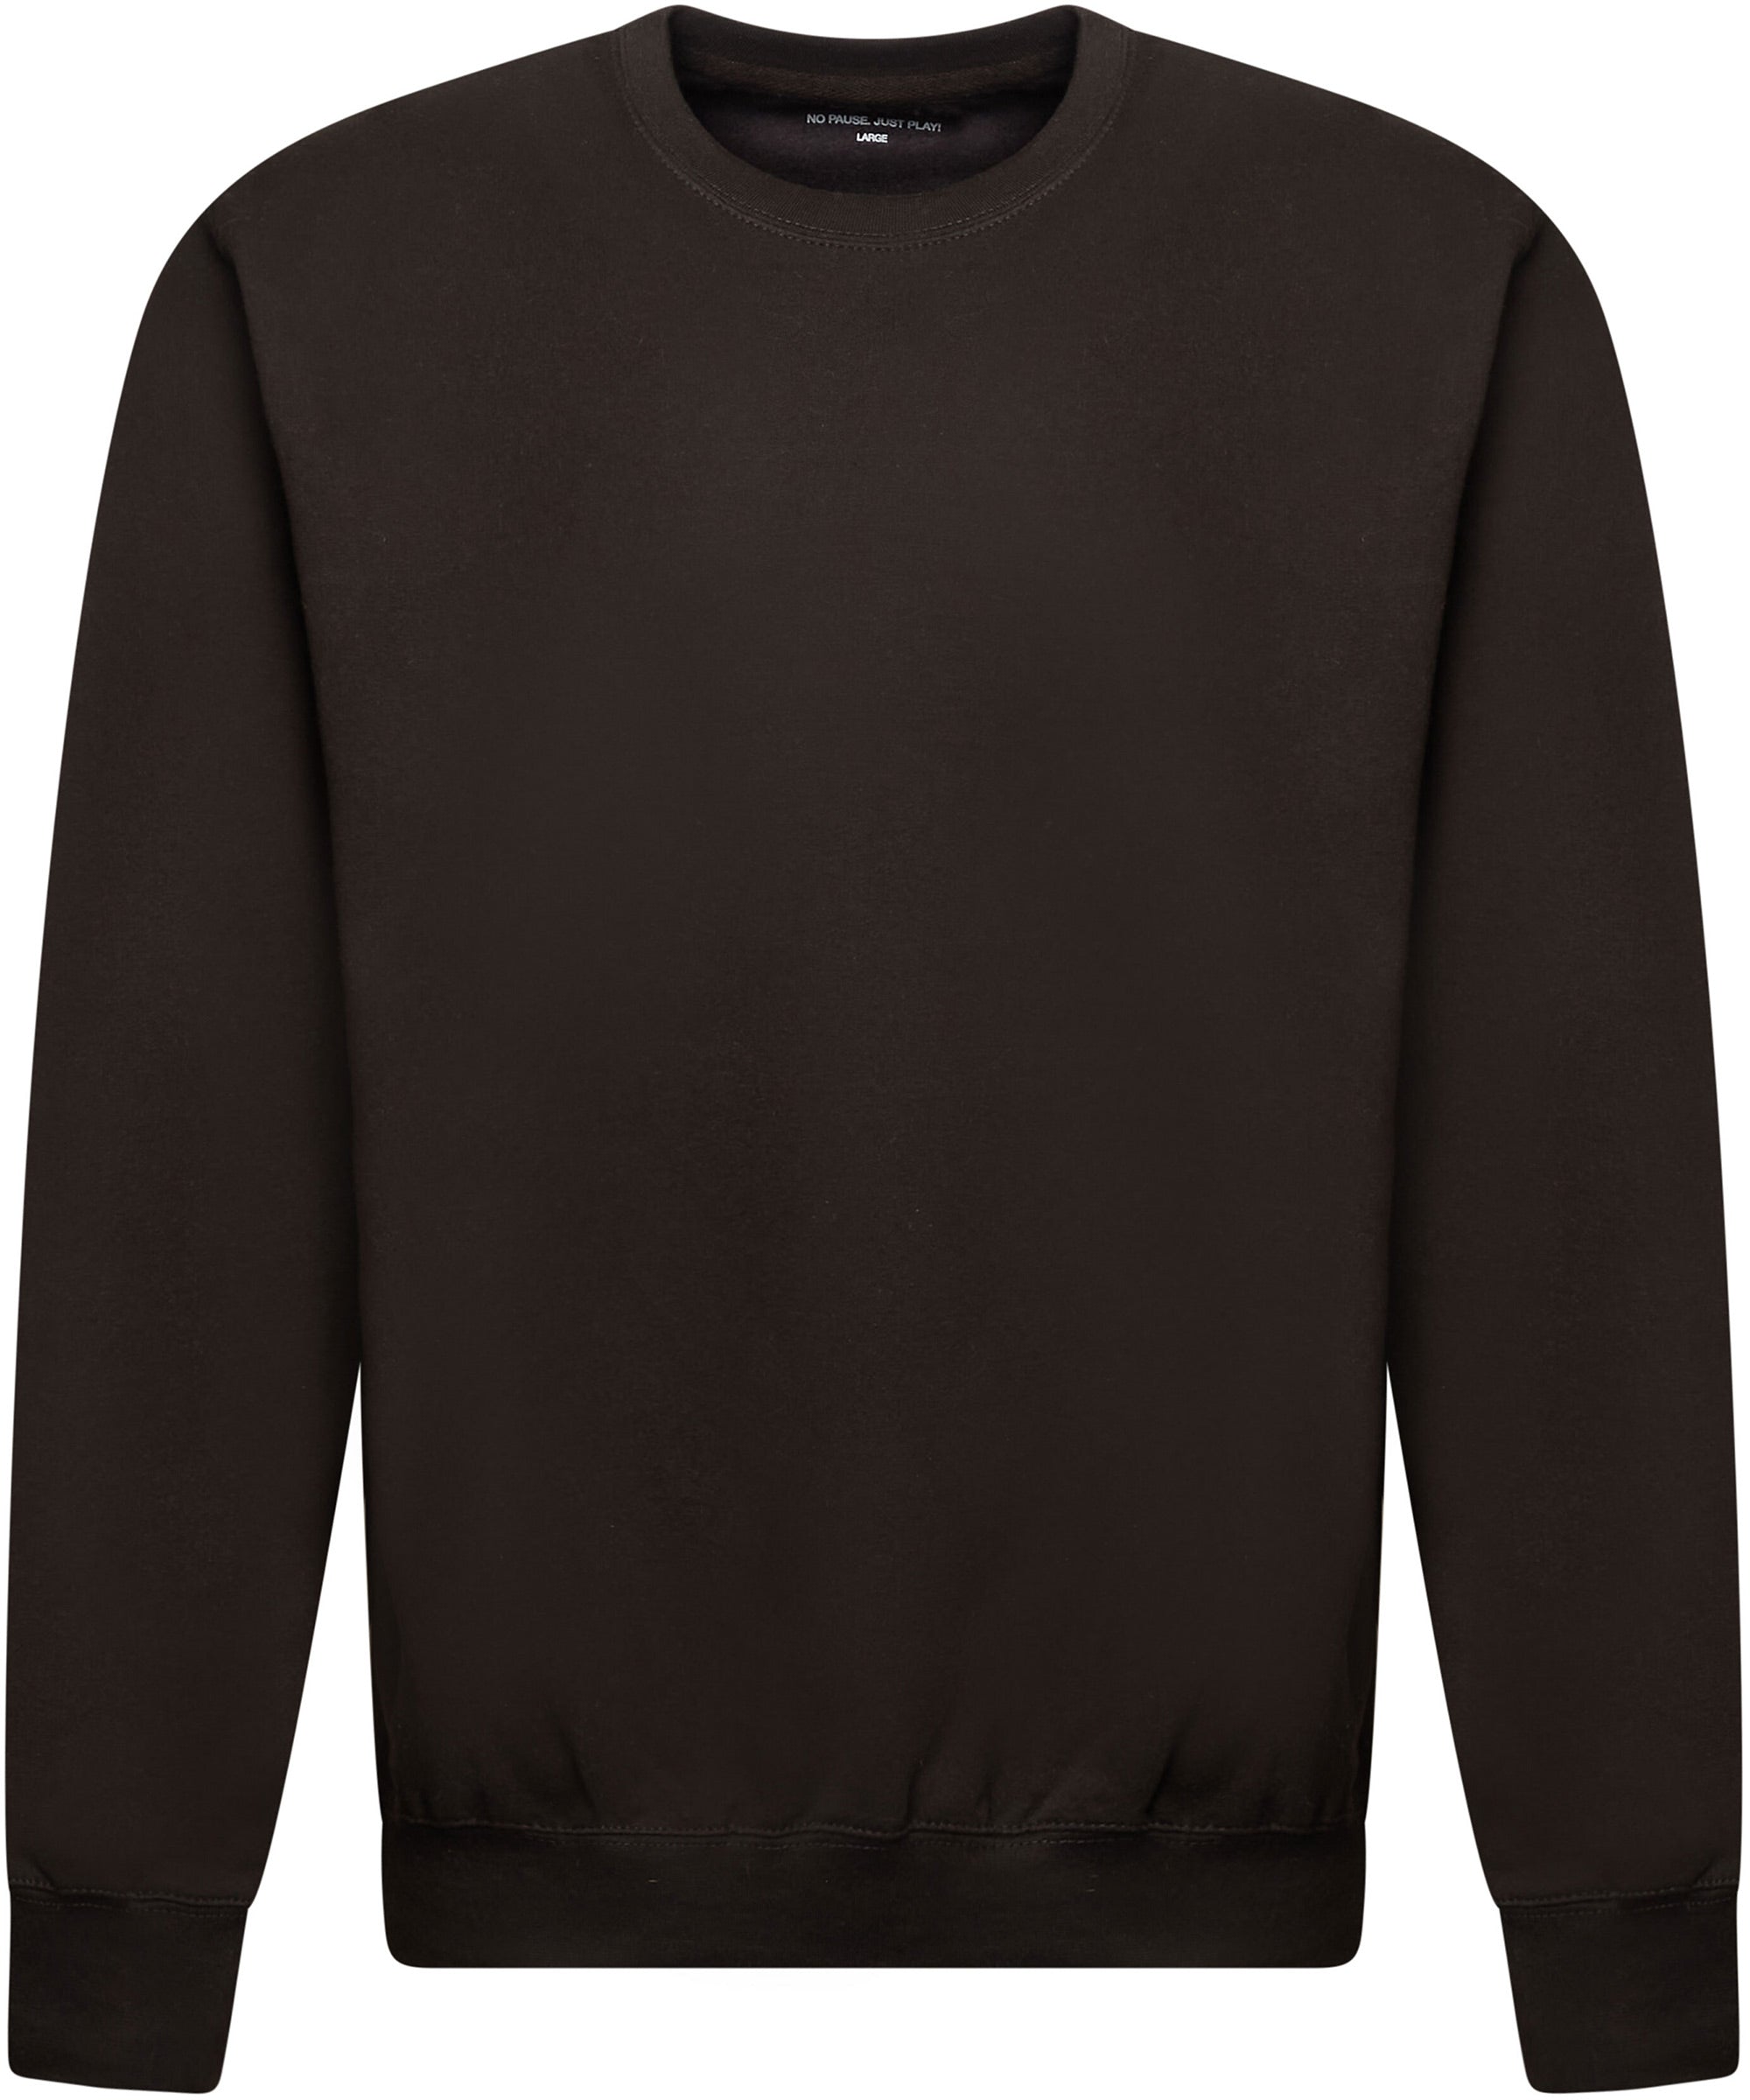 Sweater Black Front